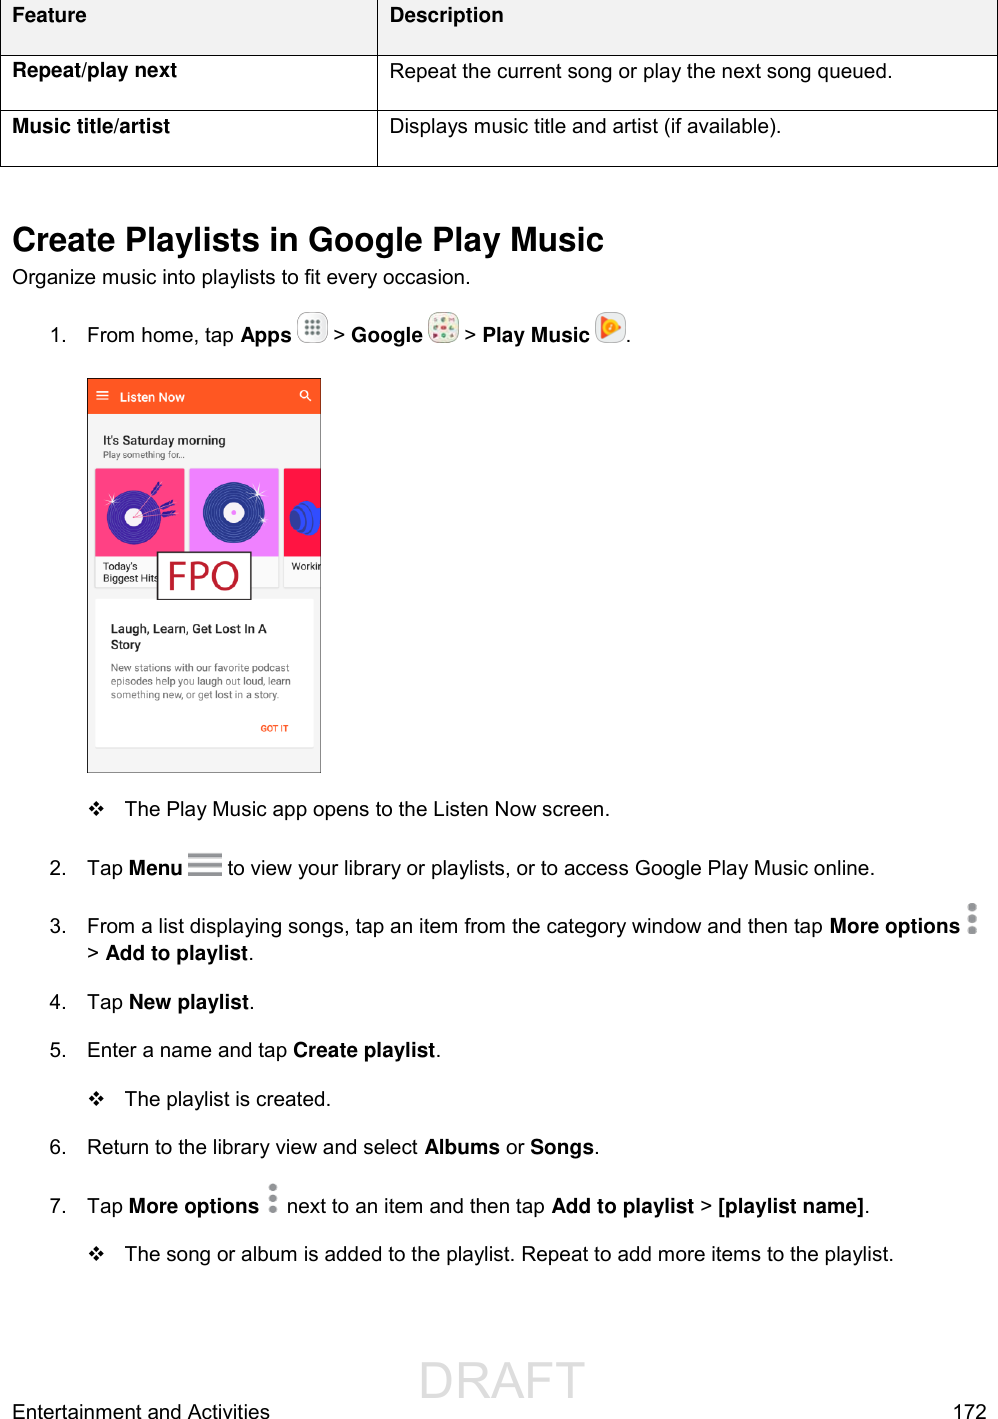                  DRAFT FOR INTERNAL USE ONLYEntertainment and Activities  172 Feature Description Repeat/play next Repeat the current song or play the next song queued. Music title/artist Displays music title and artist (if available).  Create Playlists in Google Play Music Organize music into playlists to fit every occasion. 1.  From home, tap Apps   &gt; Google   &gt; Play Music  .     The Play Music app opens to the Listen Now screen. 2.  Tap Menu  to view your library or playlists, or to access Google Play Music online.  3.  From a list displaying songs, tap an item from the category window and then tap More options &gt; Add to playlist. 4.  Tap New playlist.  5.  Enter a name and tap Create playlist.    The playlist is created. 6.  Return to the library view and select Albums or Songs. 7.  Tap More options   next to an item and then tap Add to playlist &gt; [playlist name].    The song or album is added to the playlist. Repeat to add more items to the playlist. 